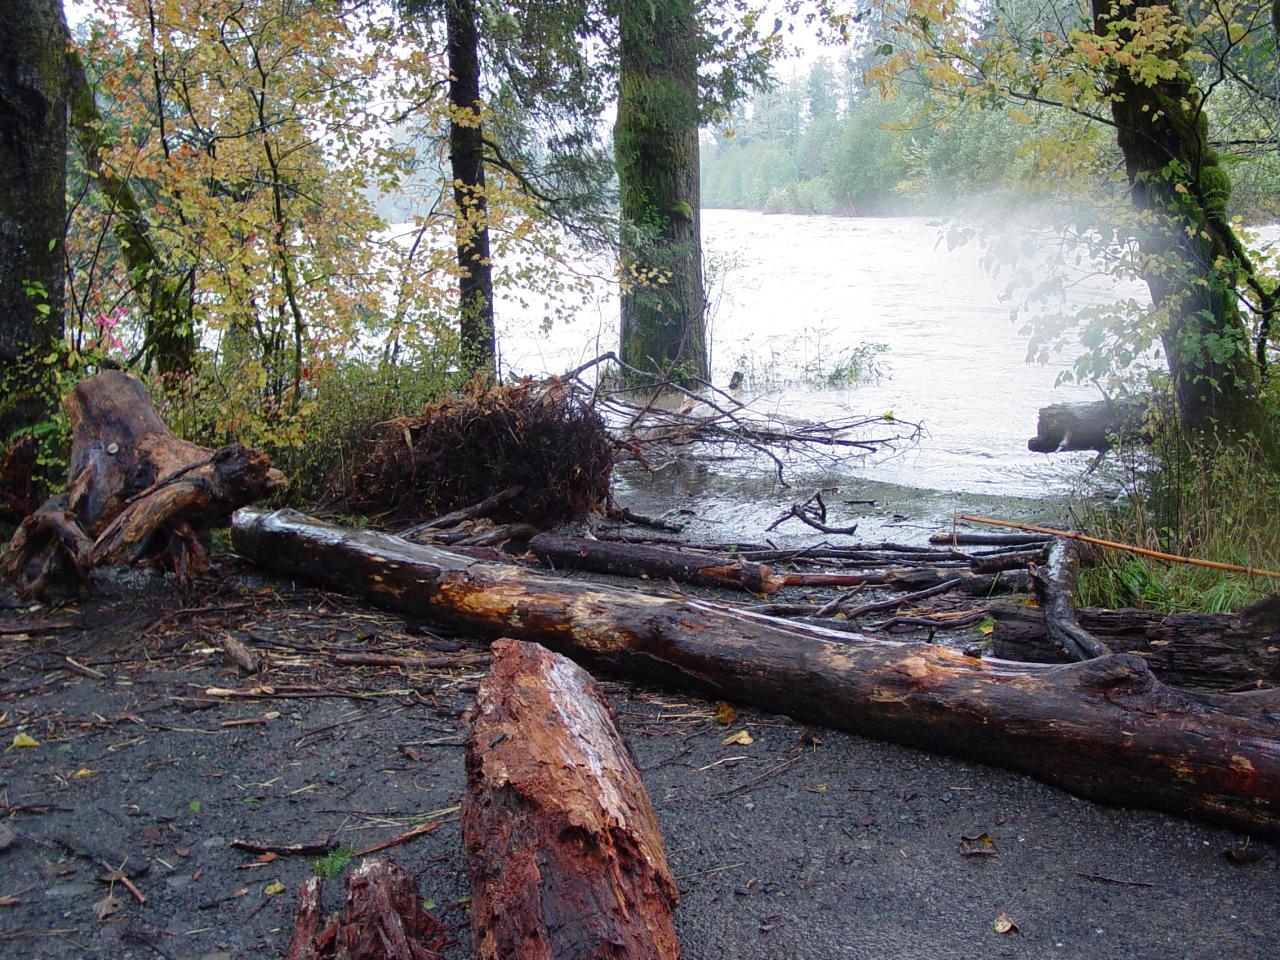 Record high flows, water & debris in the Leyendecker lauch site.